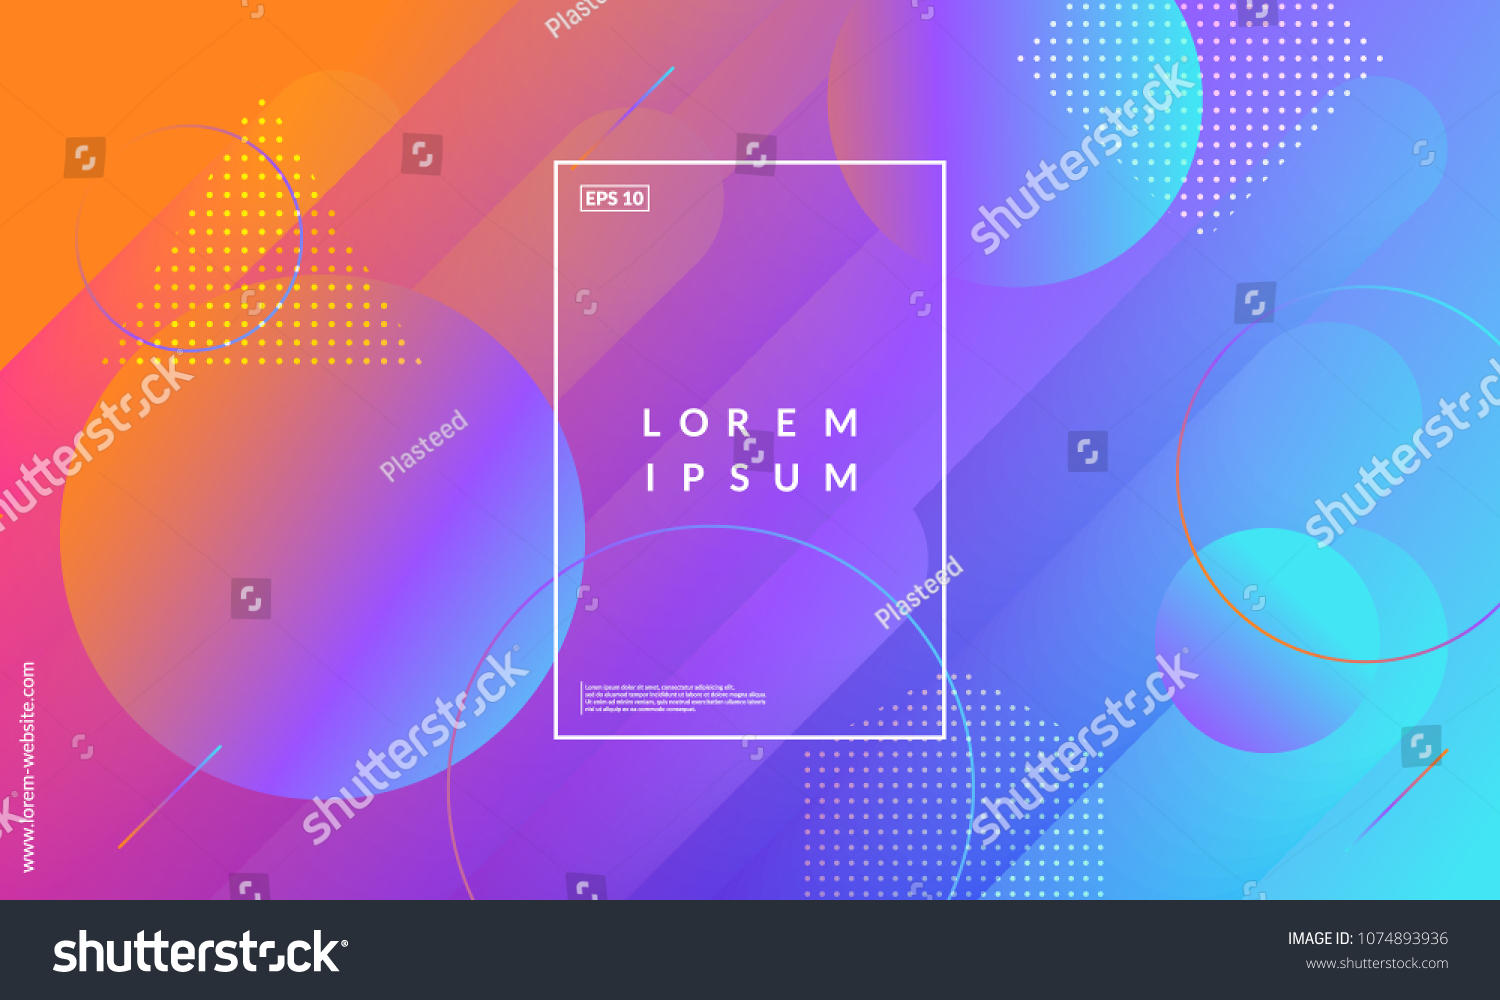 Modern geometric background. Gradient shapes composition. Eps10 vector. #1074893936